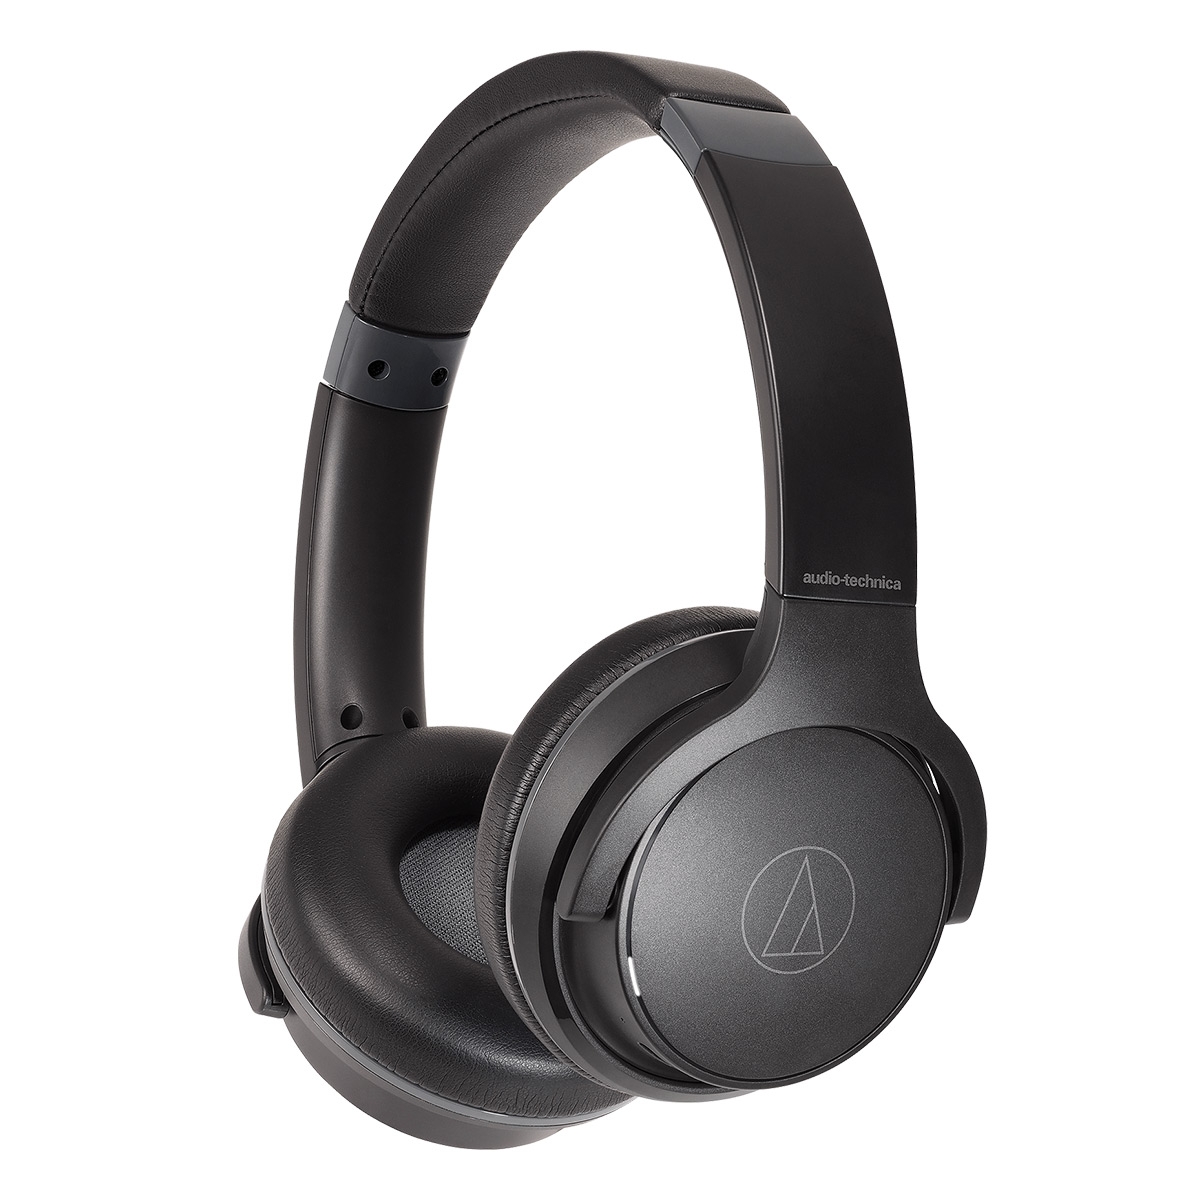 Audio-technica Ath-s220bt Wireless On-ear Headphones In Black At Urban Outfitters